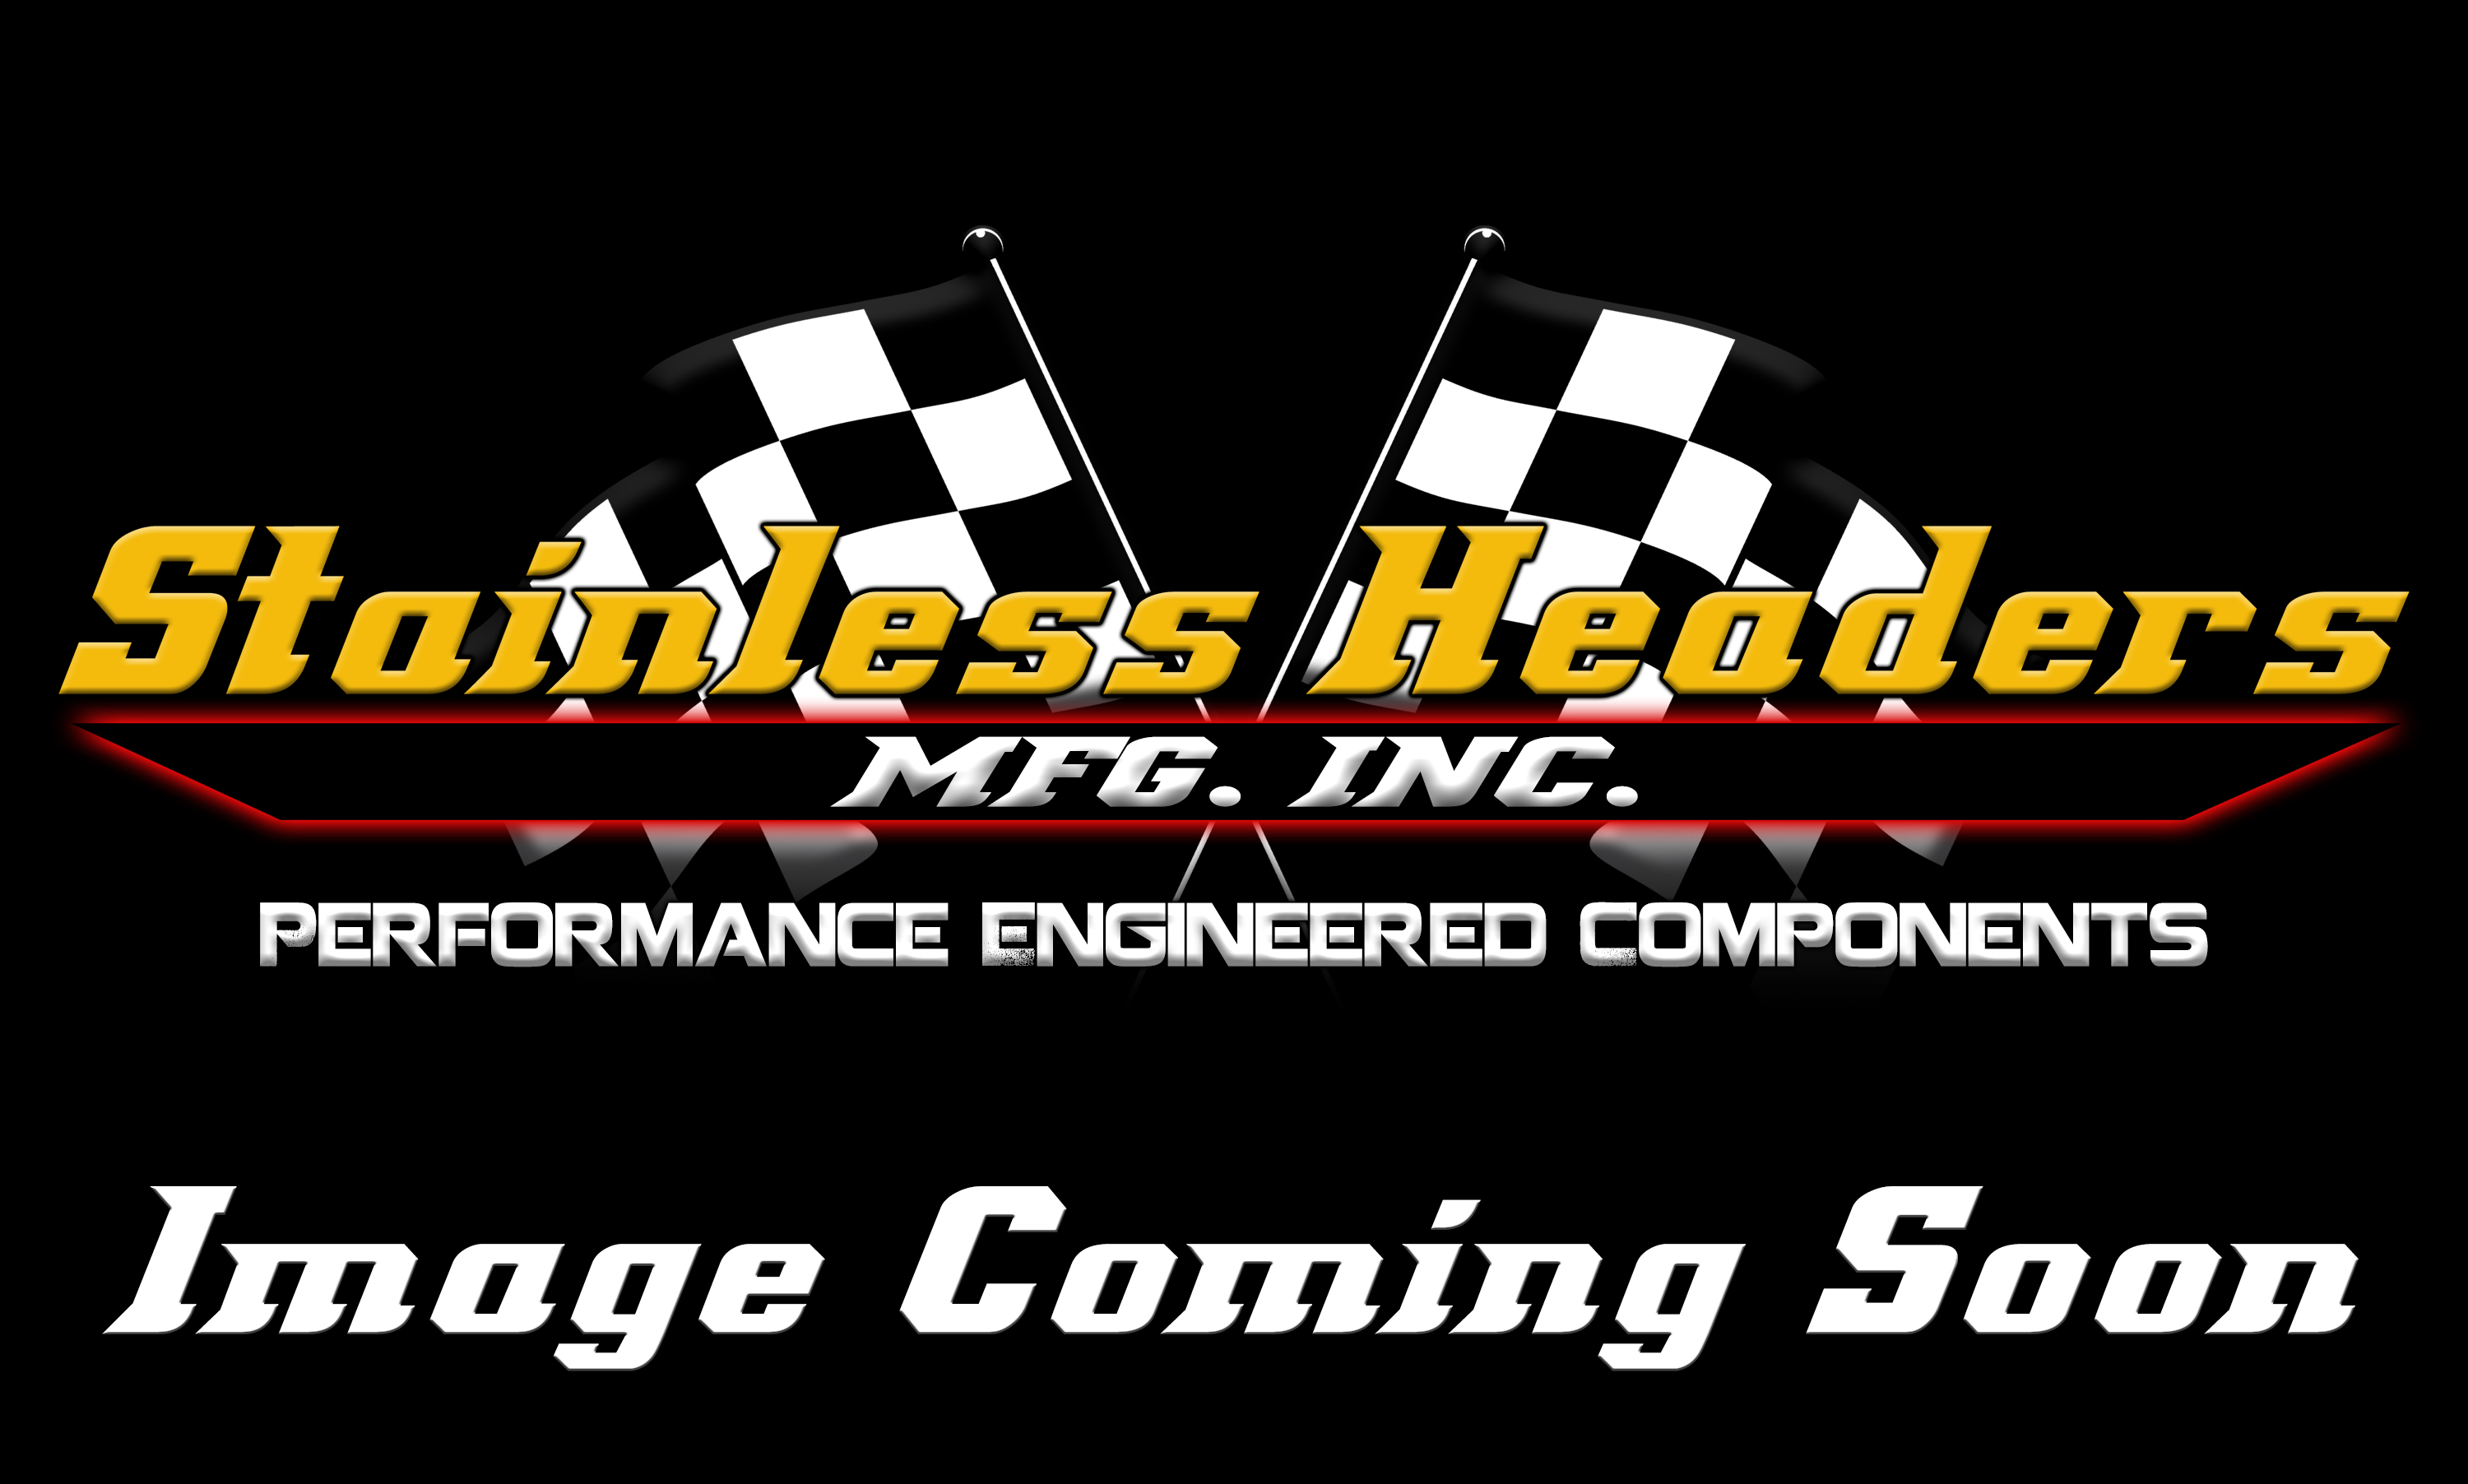 Custom Header Components - Merge Collectors - Stainless Headers - 1 3/4" Primary 5 into 1 Performance Merge Collector-16ga Mild Steel